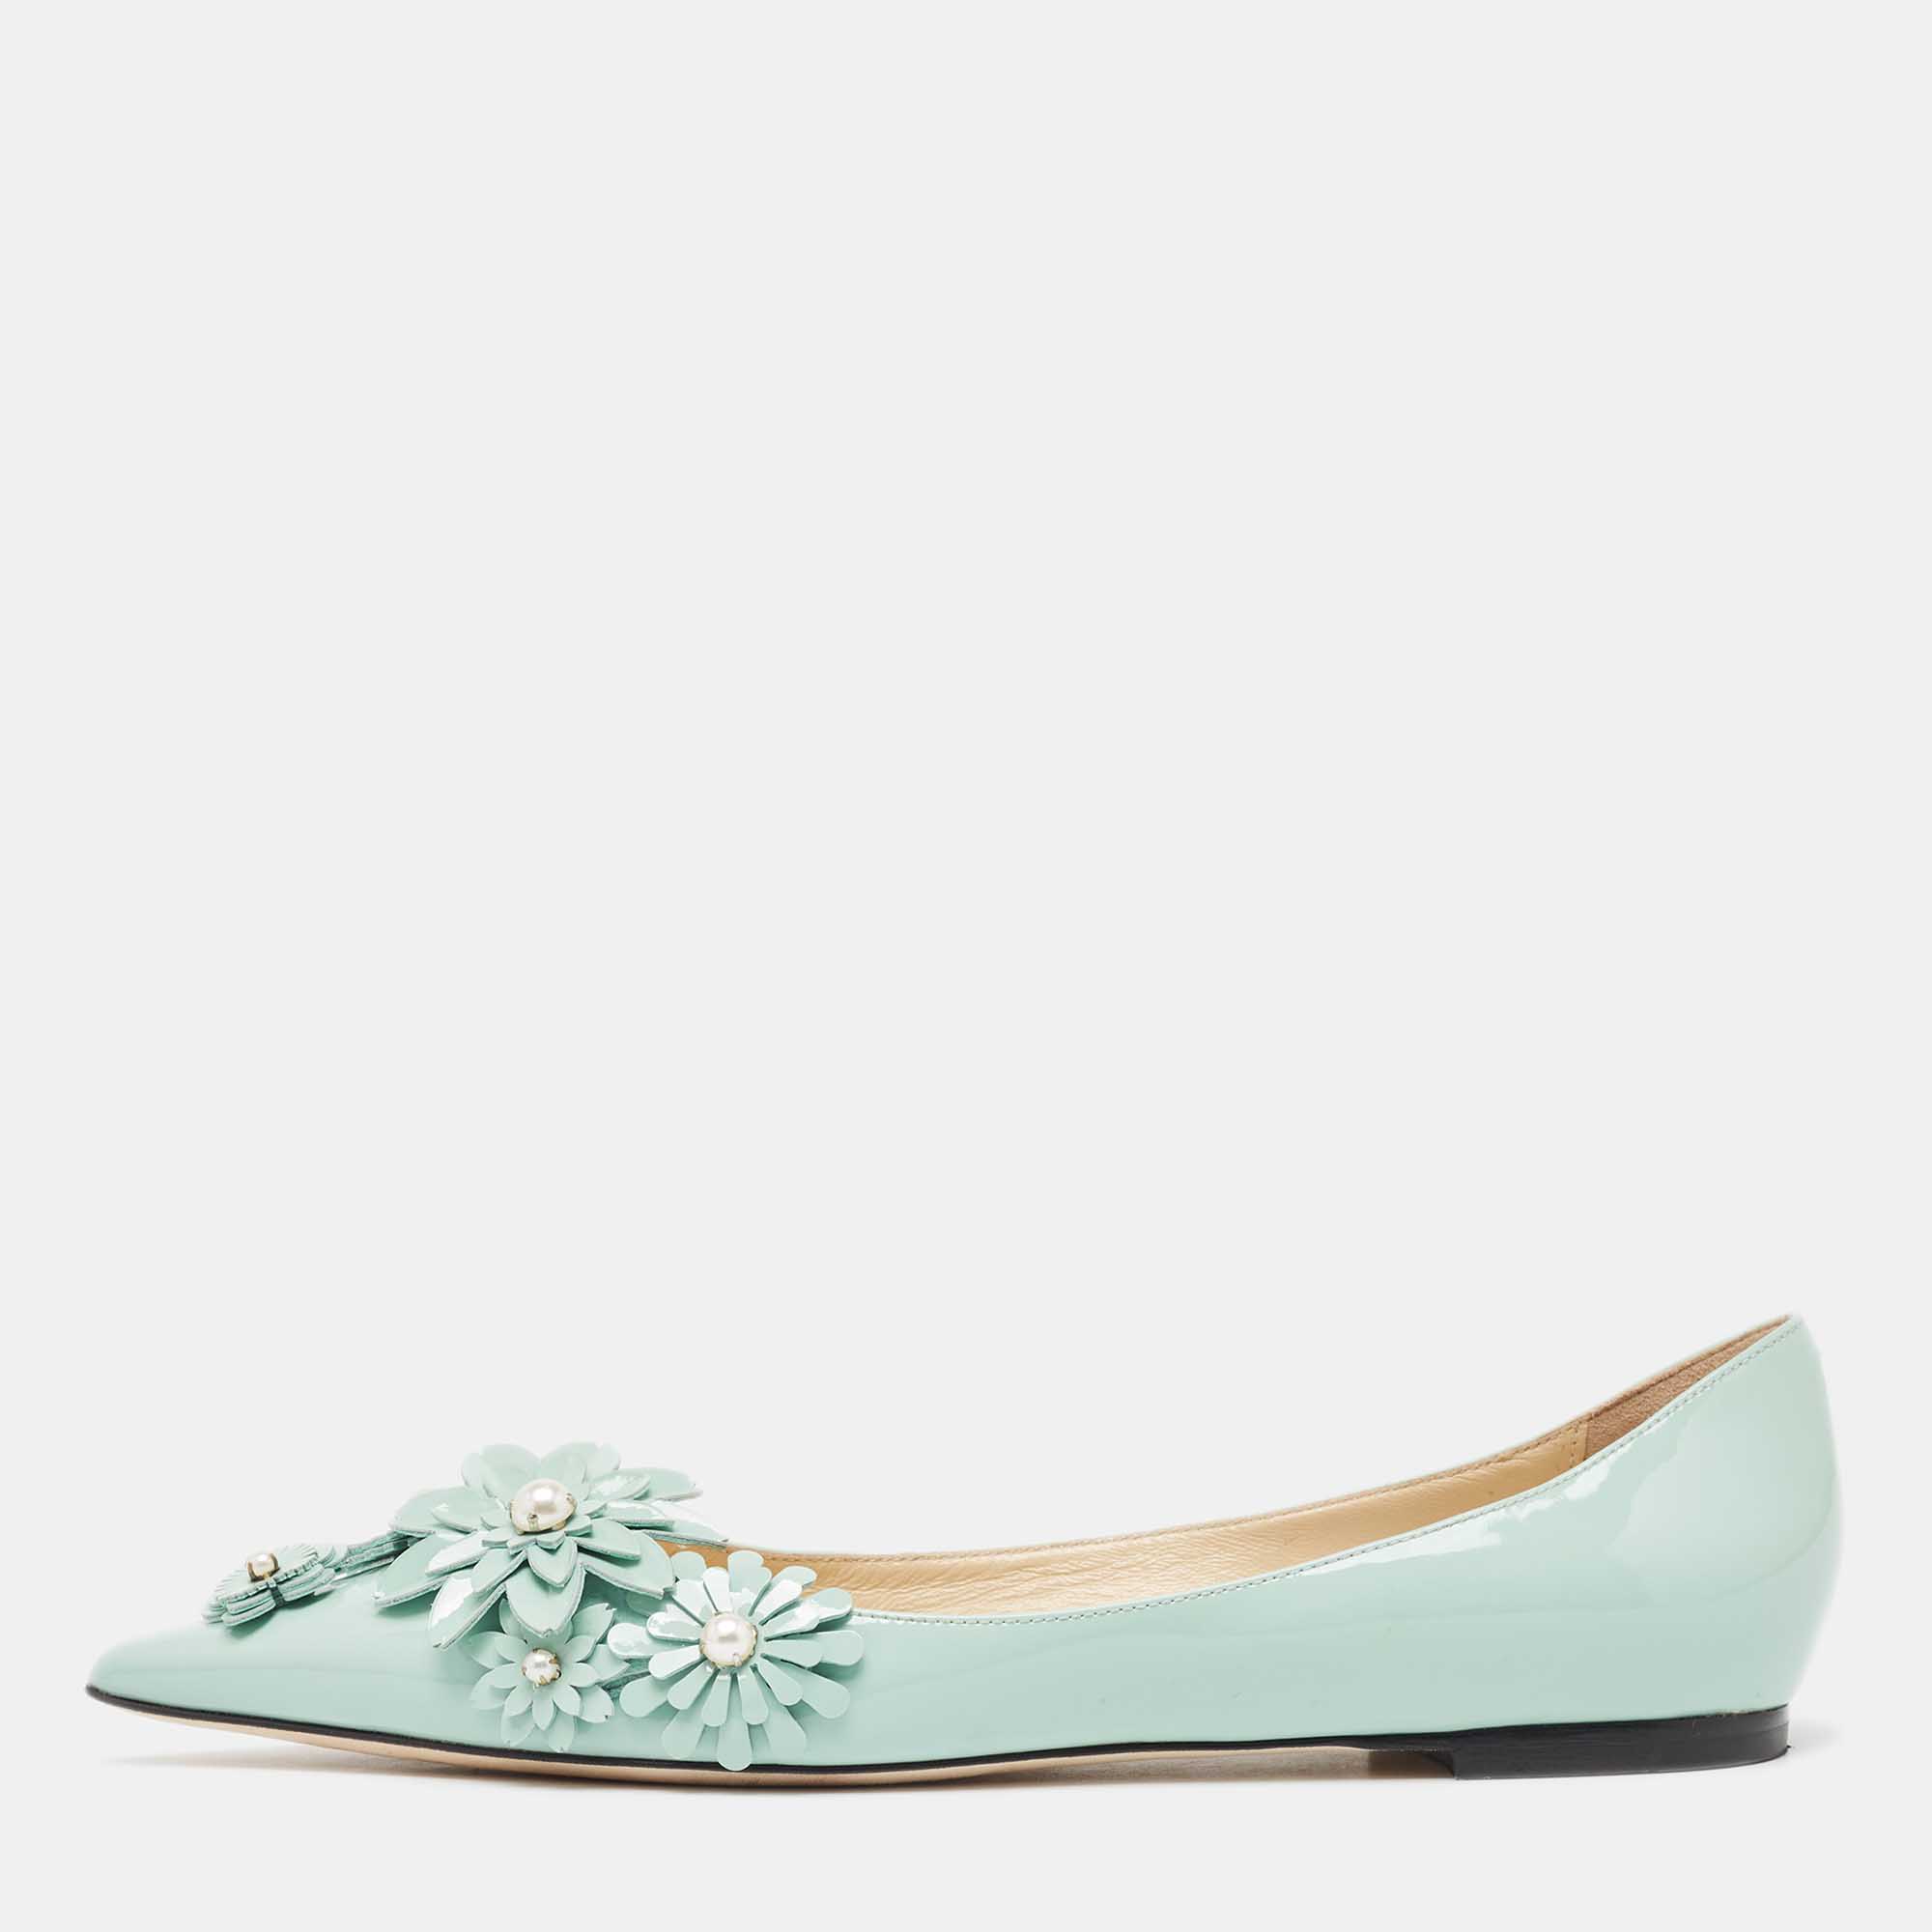 Jimmy choo mint green patent leather embellished ballet flats size 37